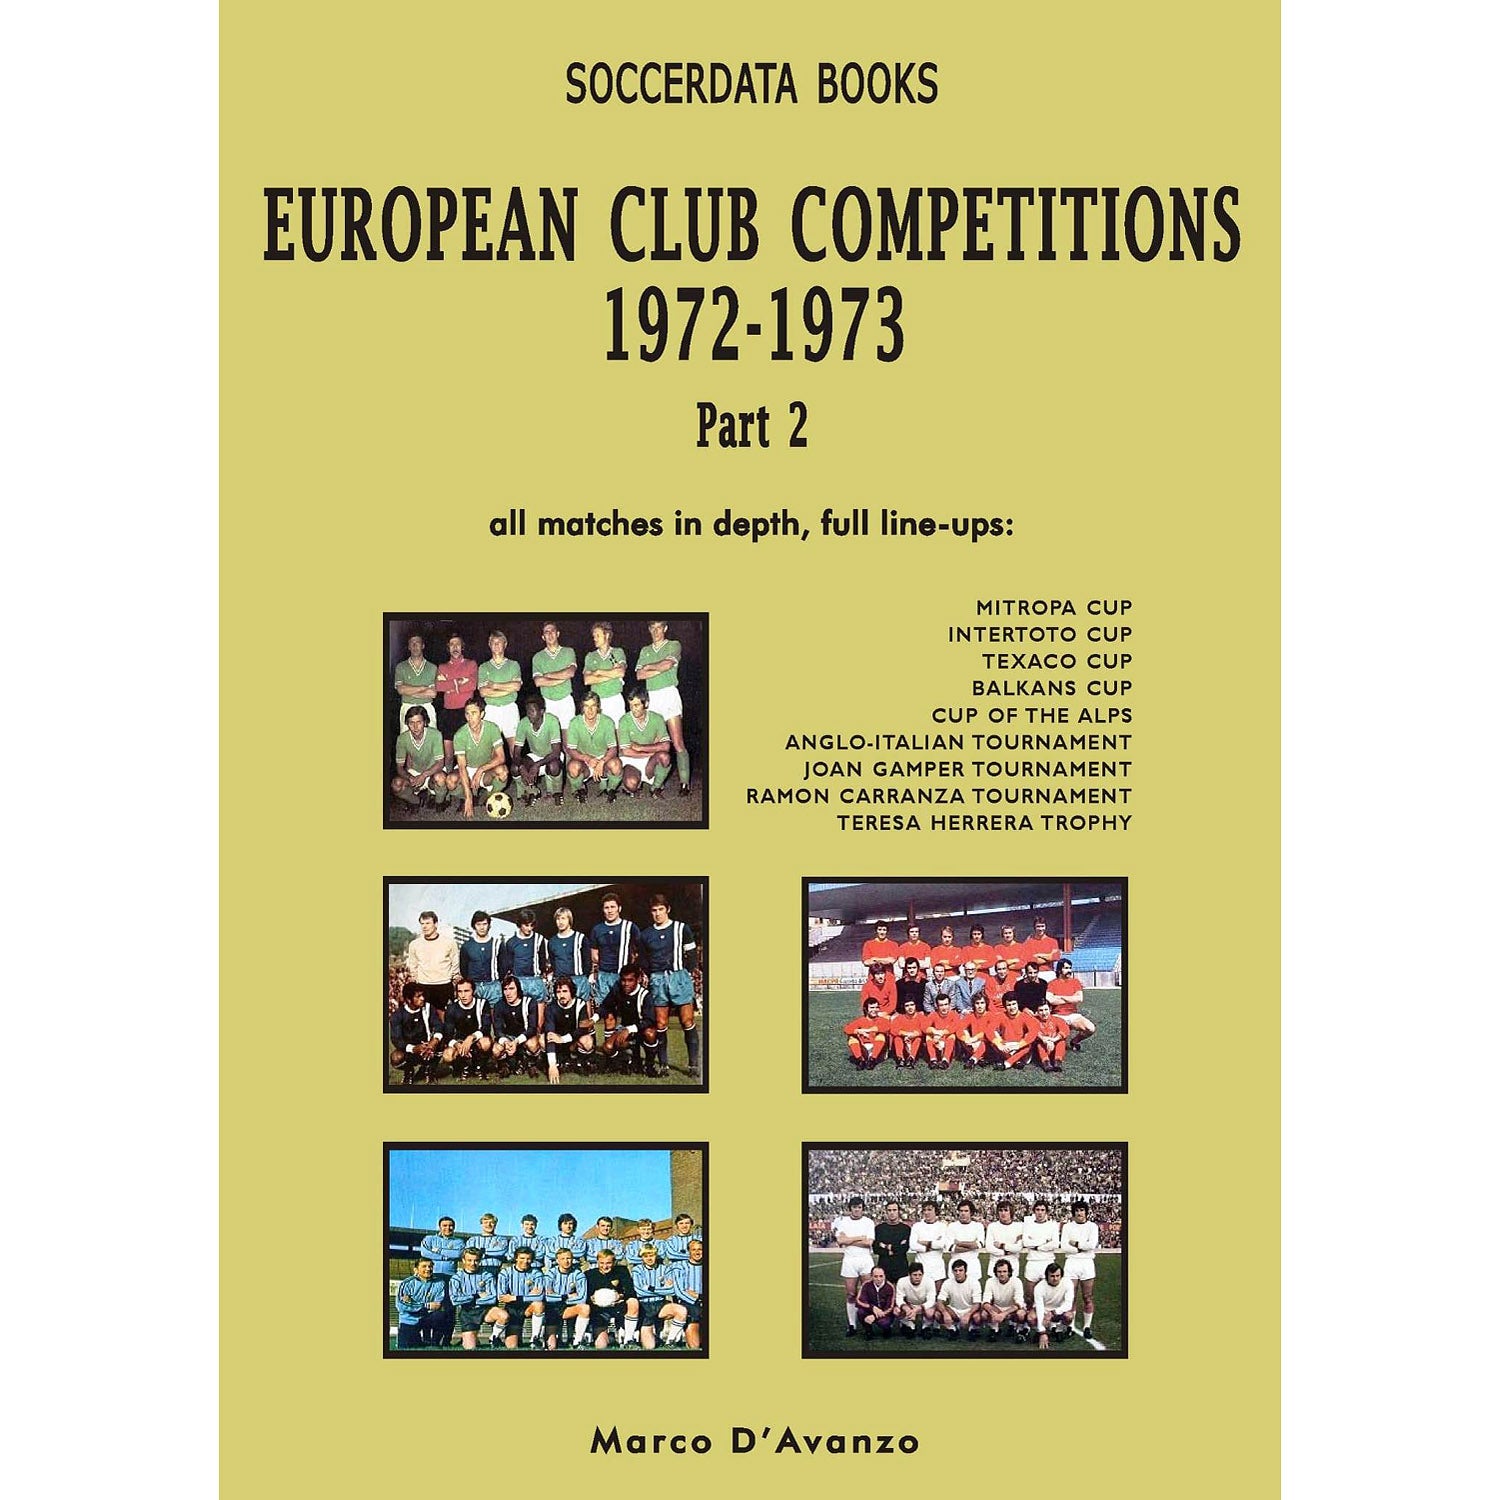 European Club Competitions 1972-1973 – Part 2